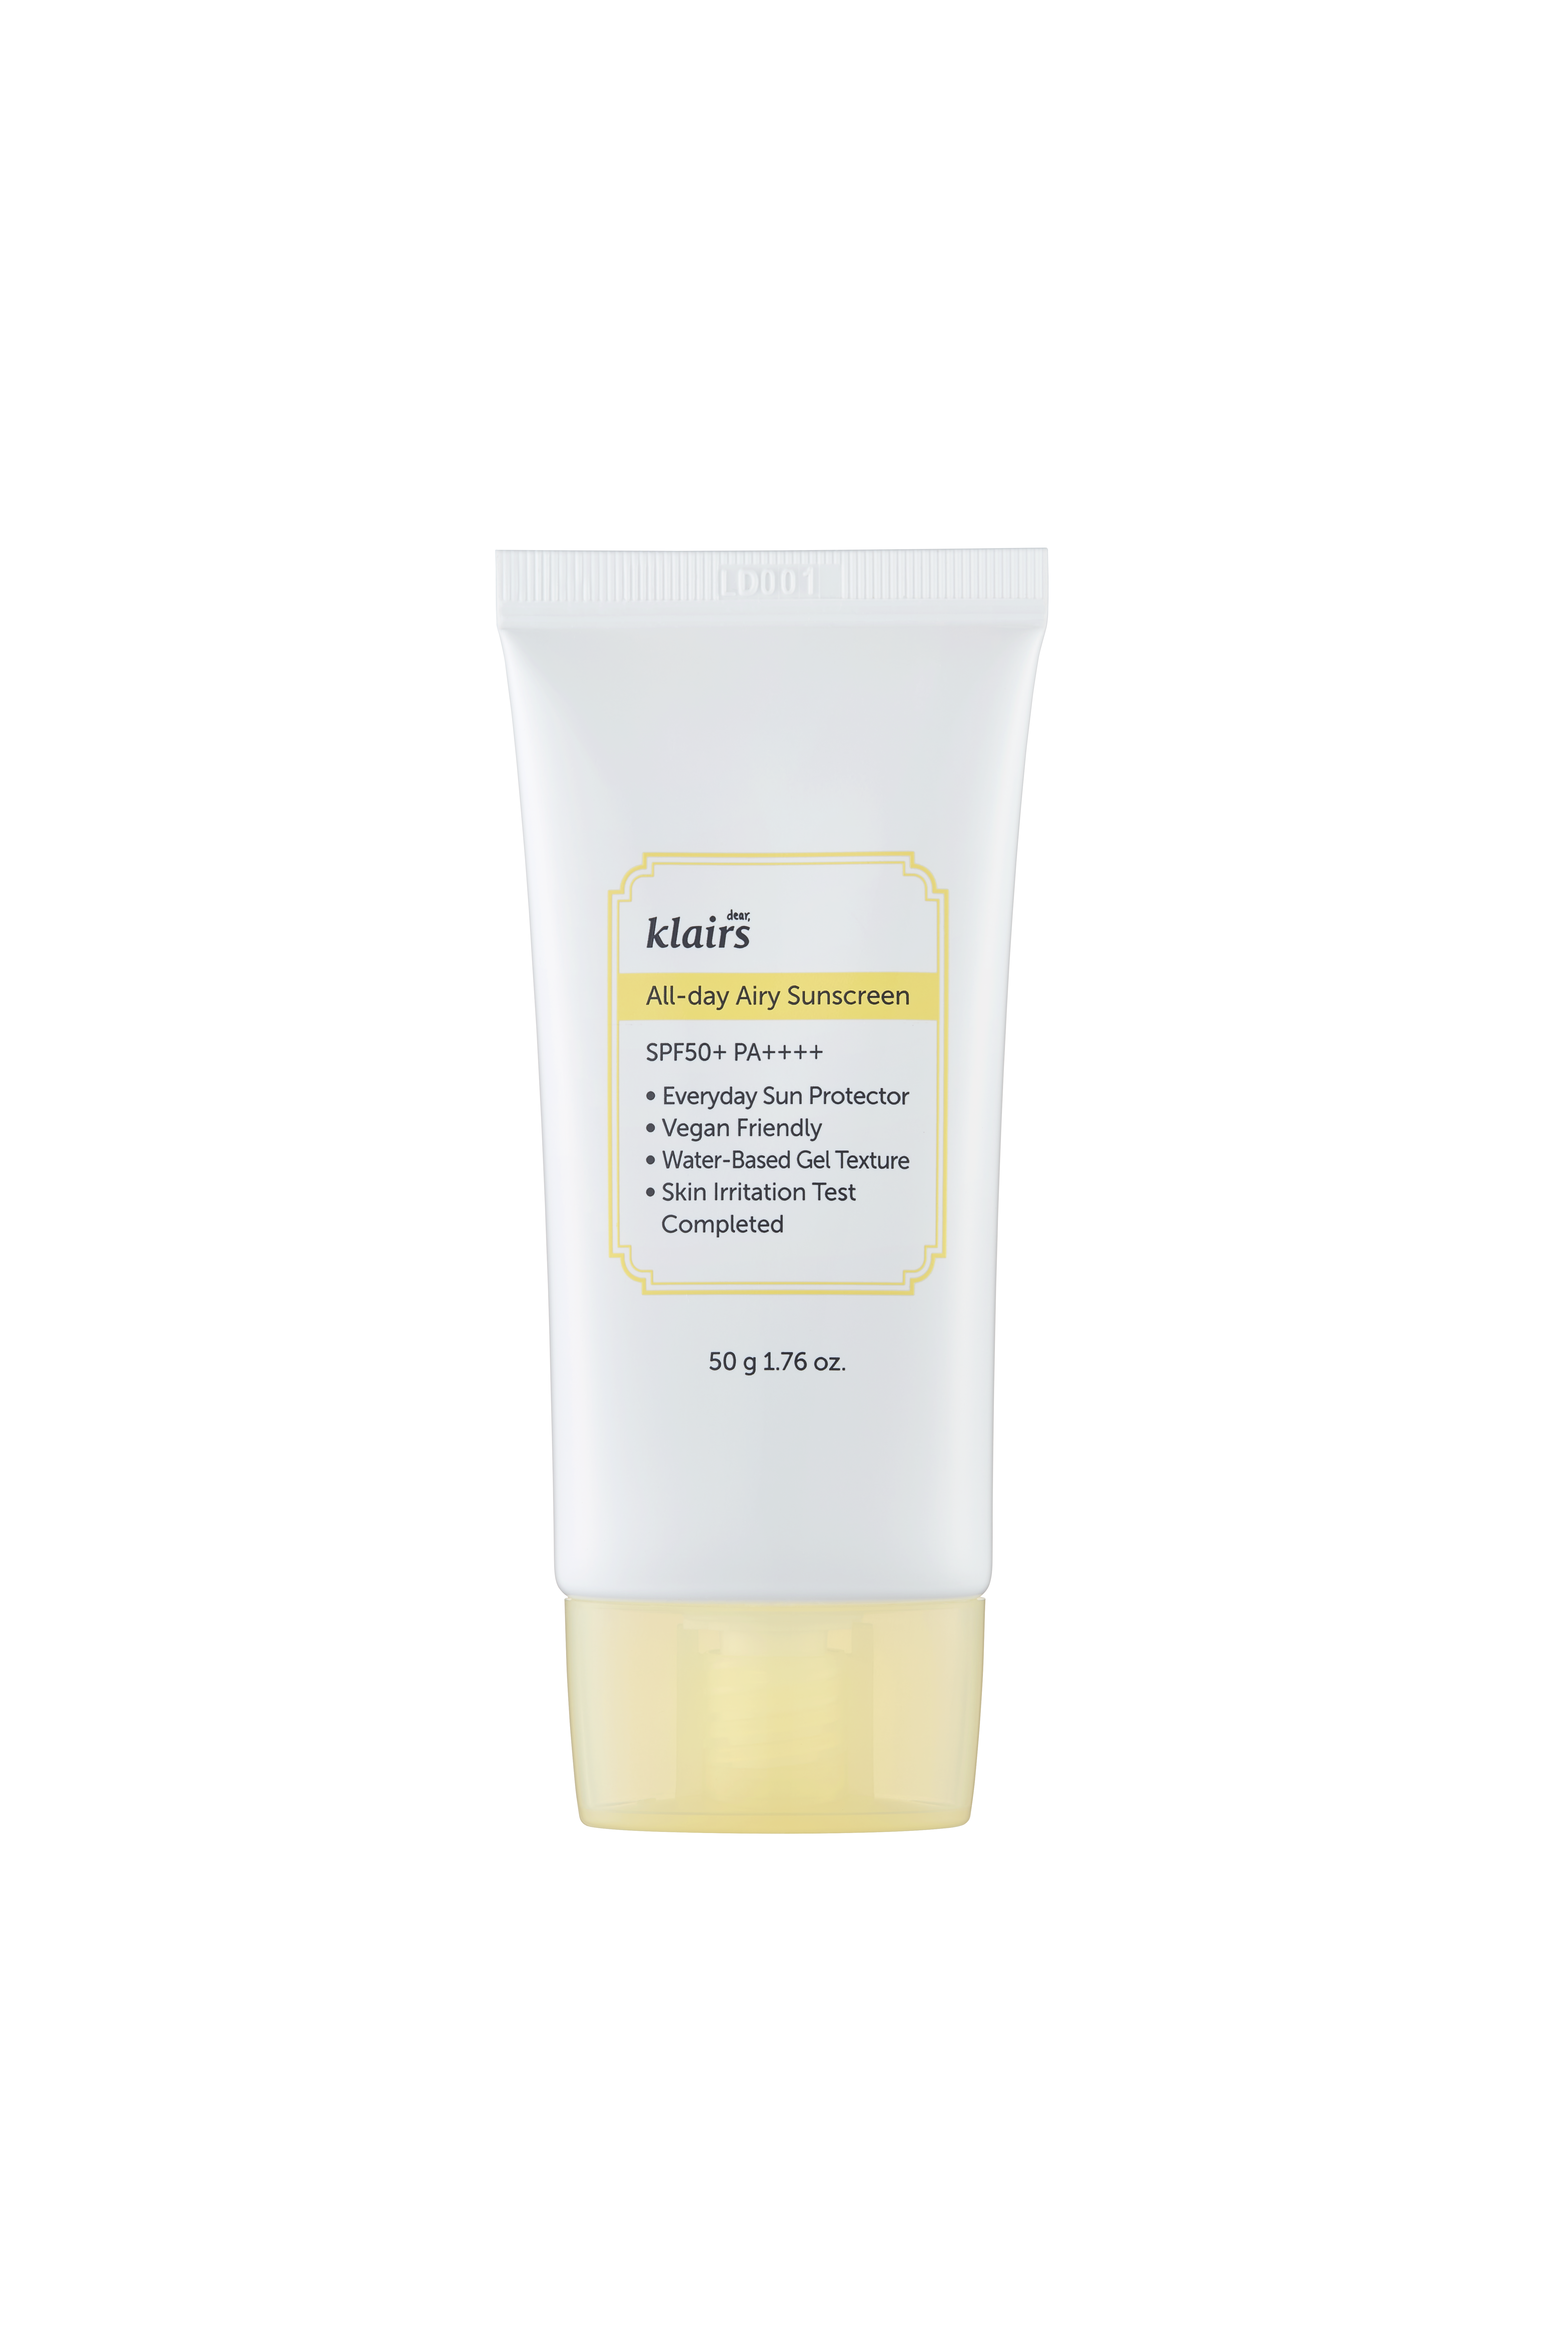 Klairs All-day Airy Sunscreen SPF50+ PA++++, 50 ml